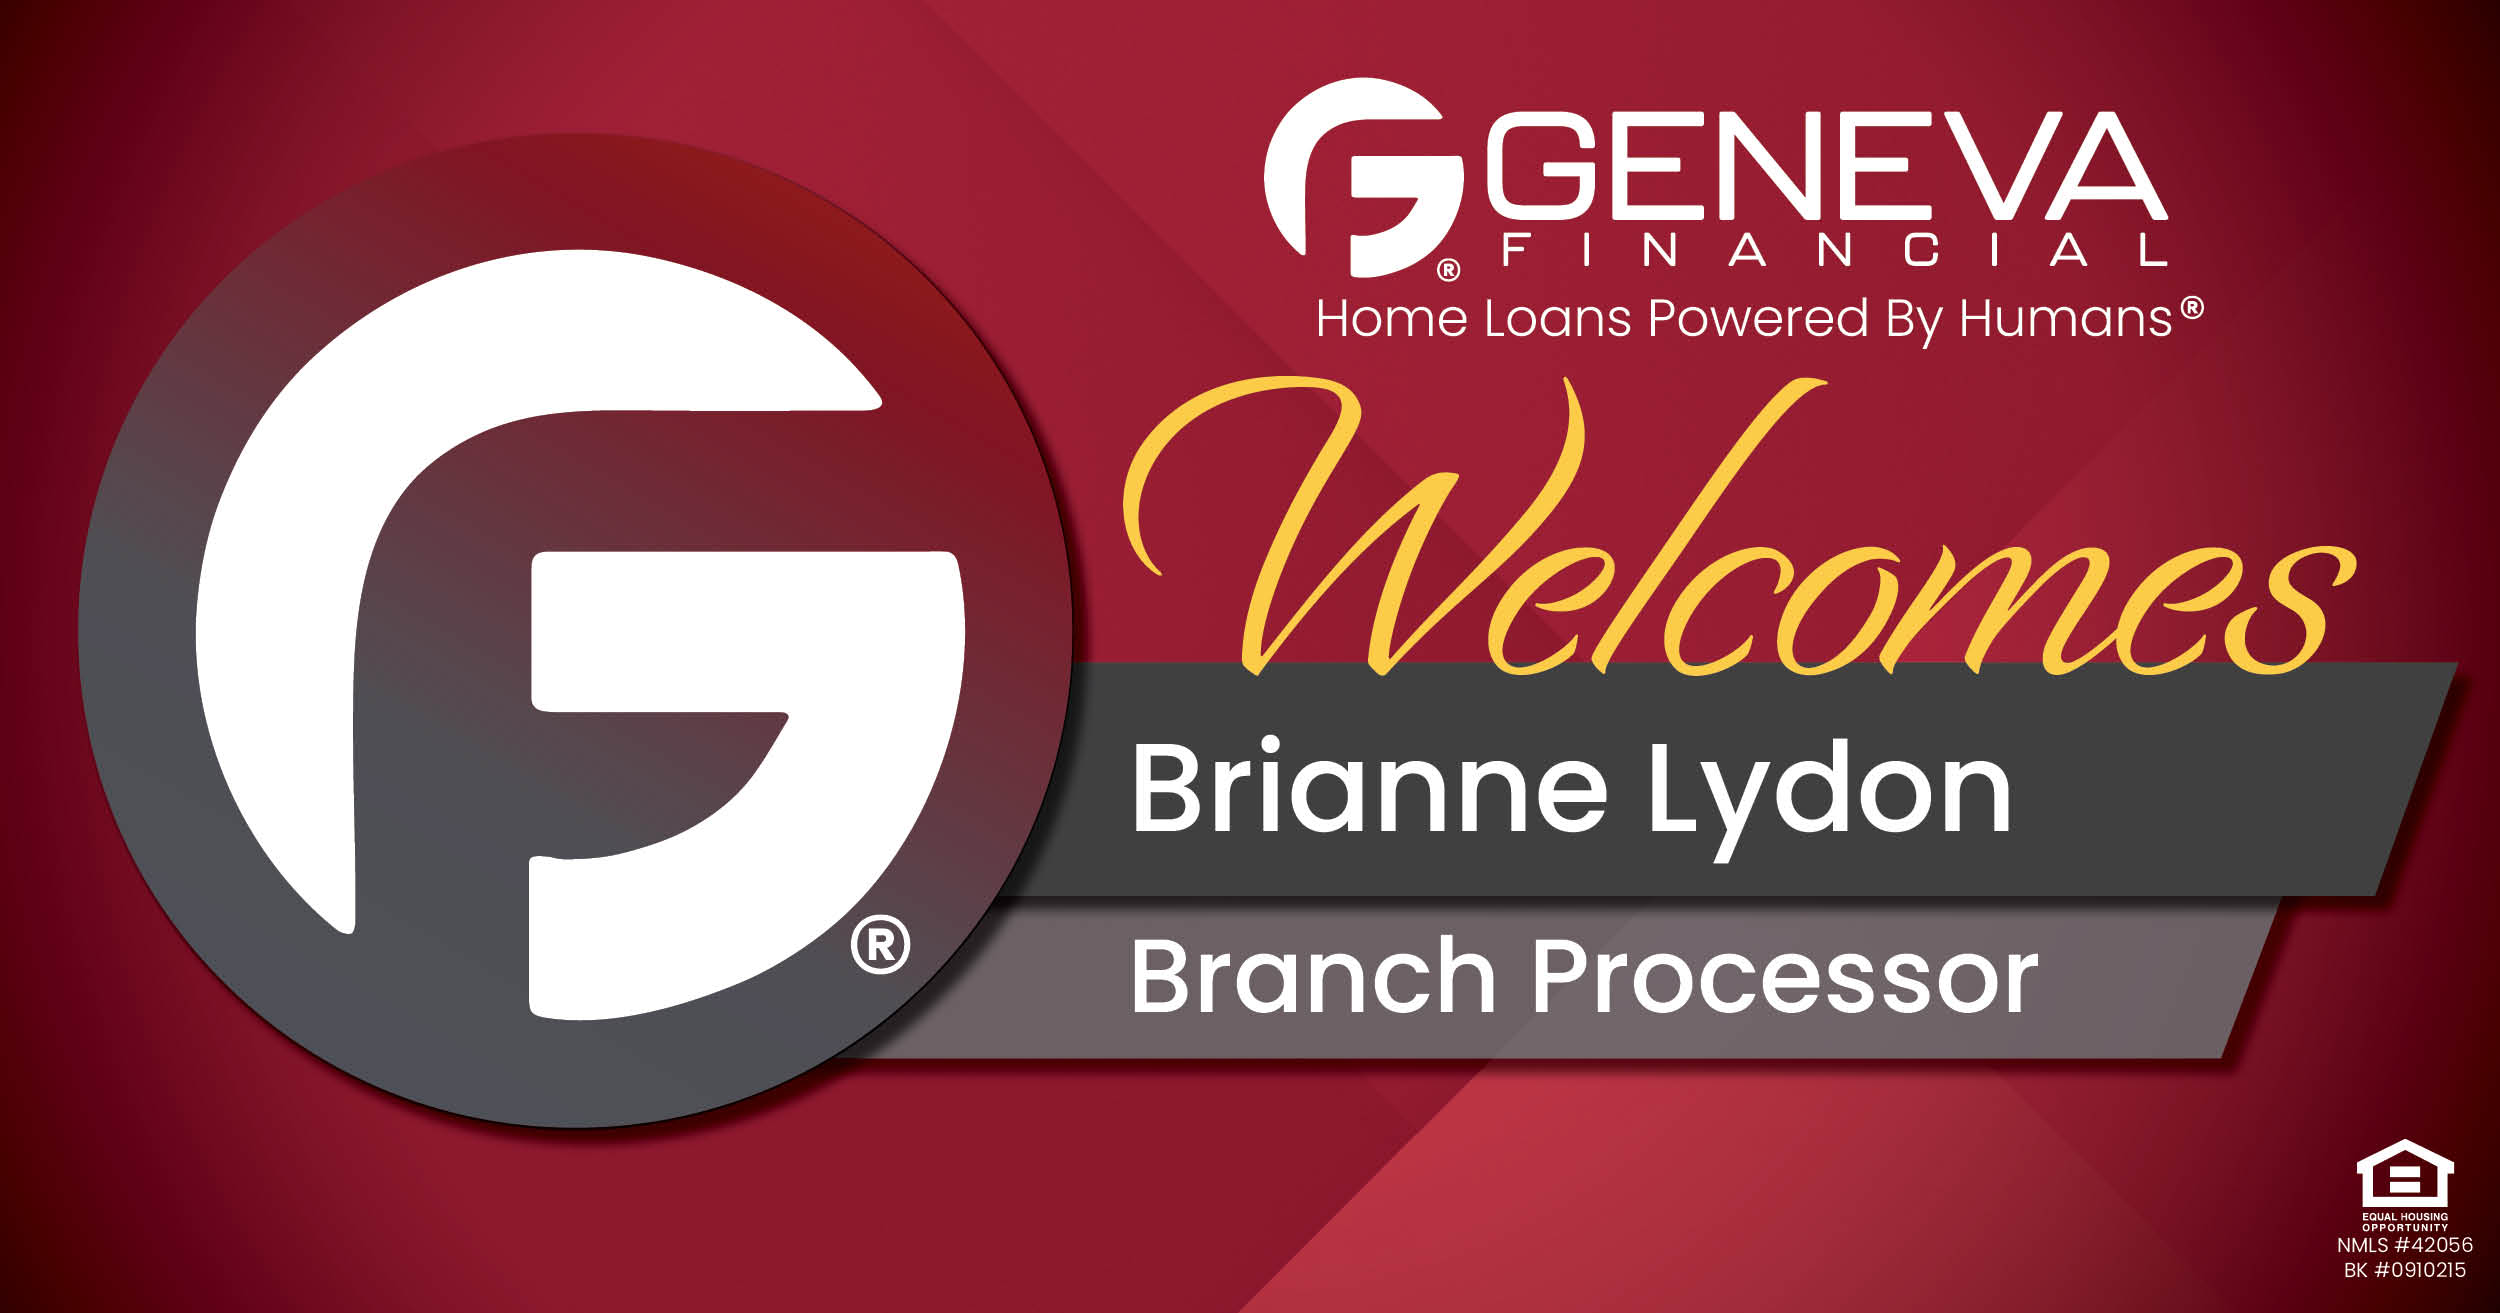 Geneva Financial Welcomes New Processor Brianne Lydon to the State of Arizona – Home Loans Powered by Humans®.